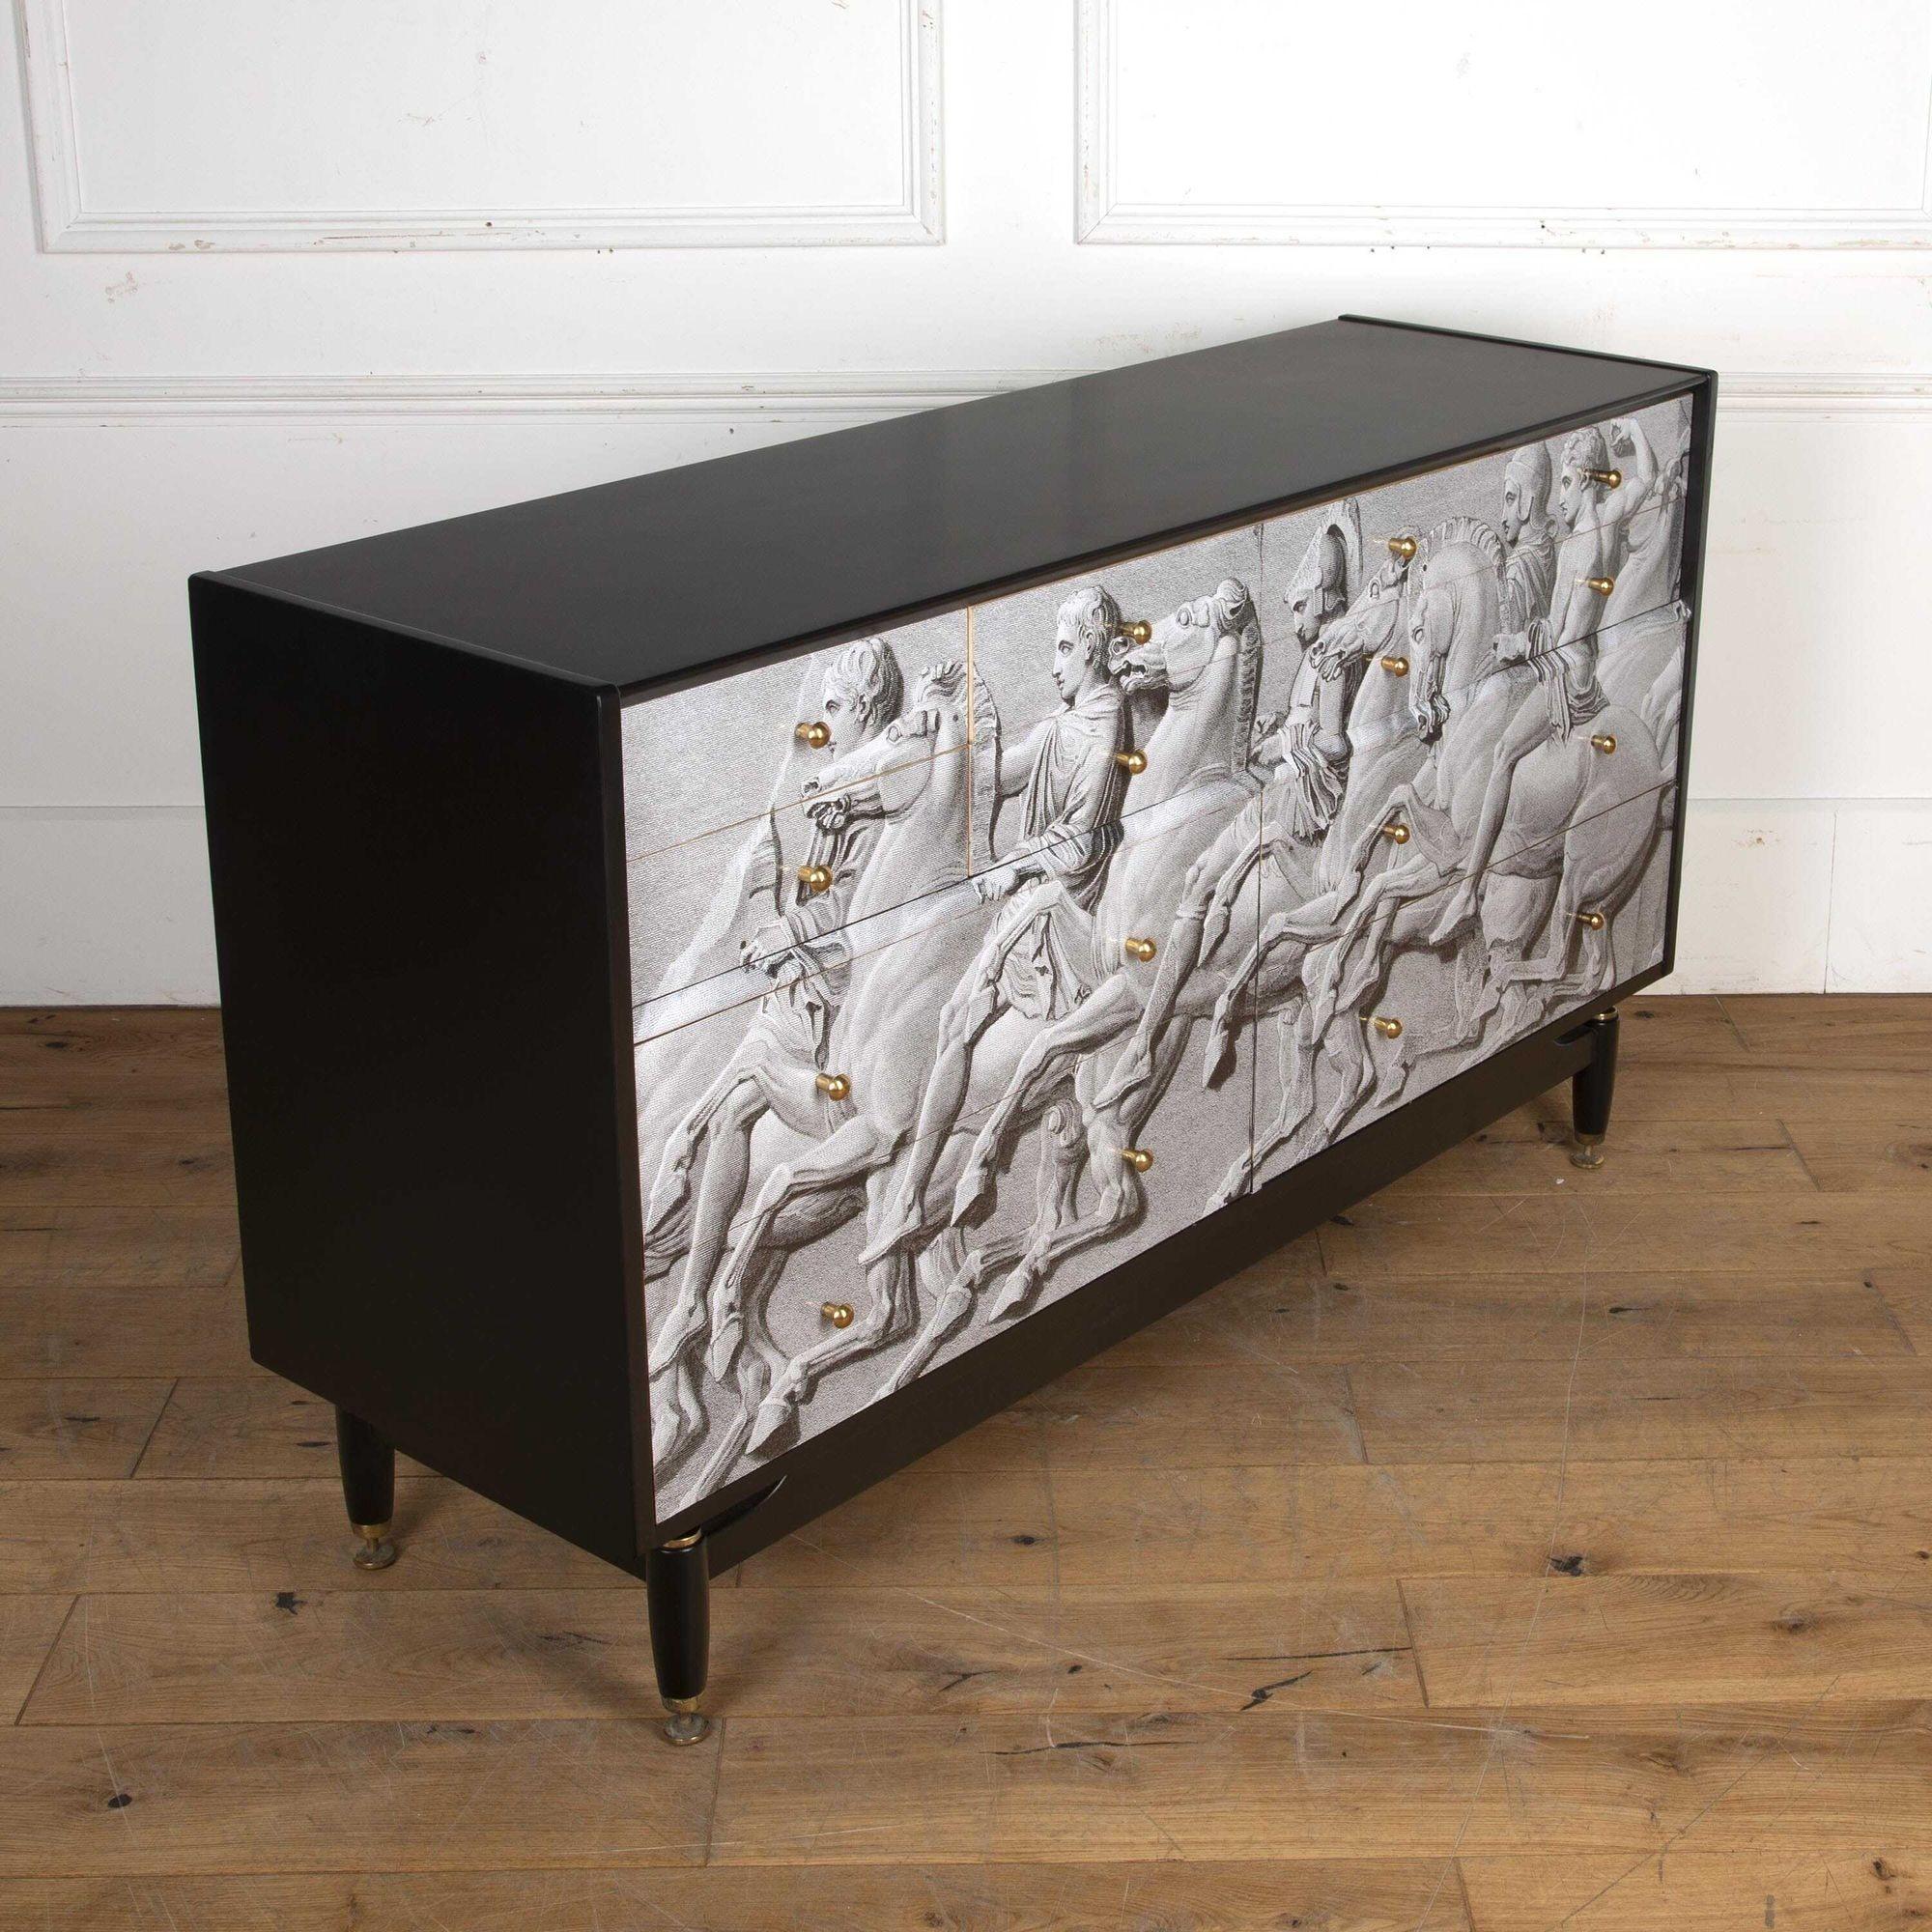 Fabulous Fornasetti style Italian Mid-Century chest of drawers.
Dating to the 1970s this chest has been recently recovered with a Fornasetti pattern.
Featuring four larger drawers at the bottom and eight smaller drawers at the top this is a